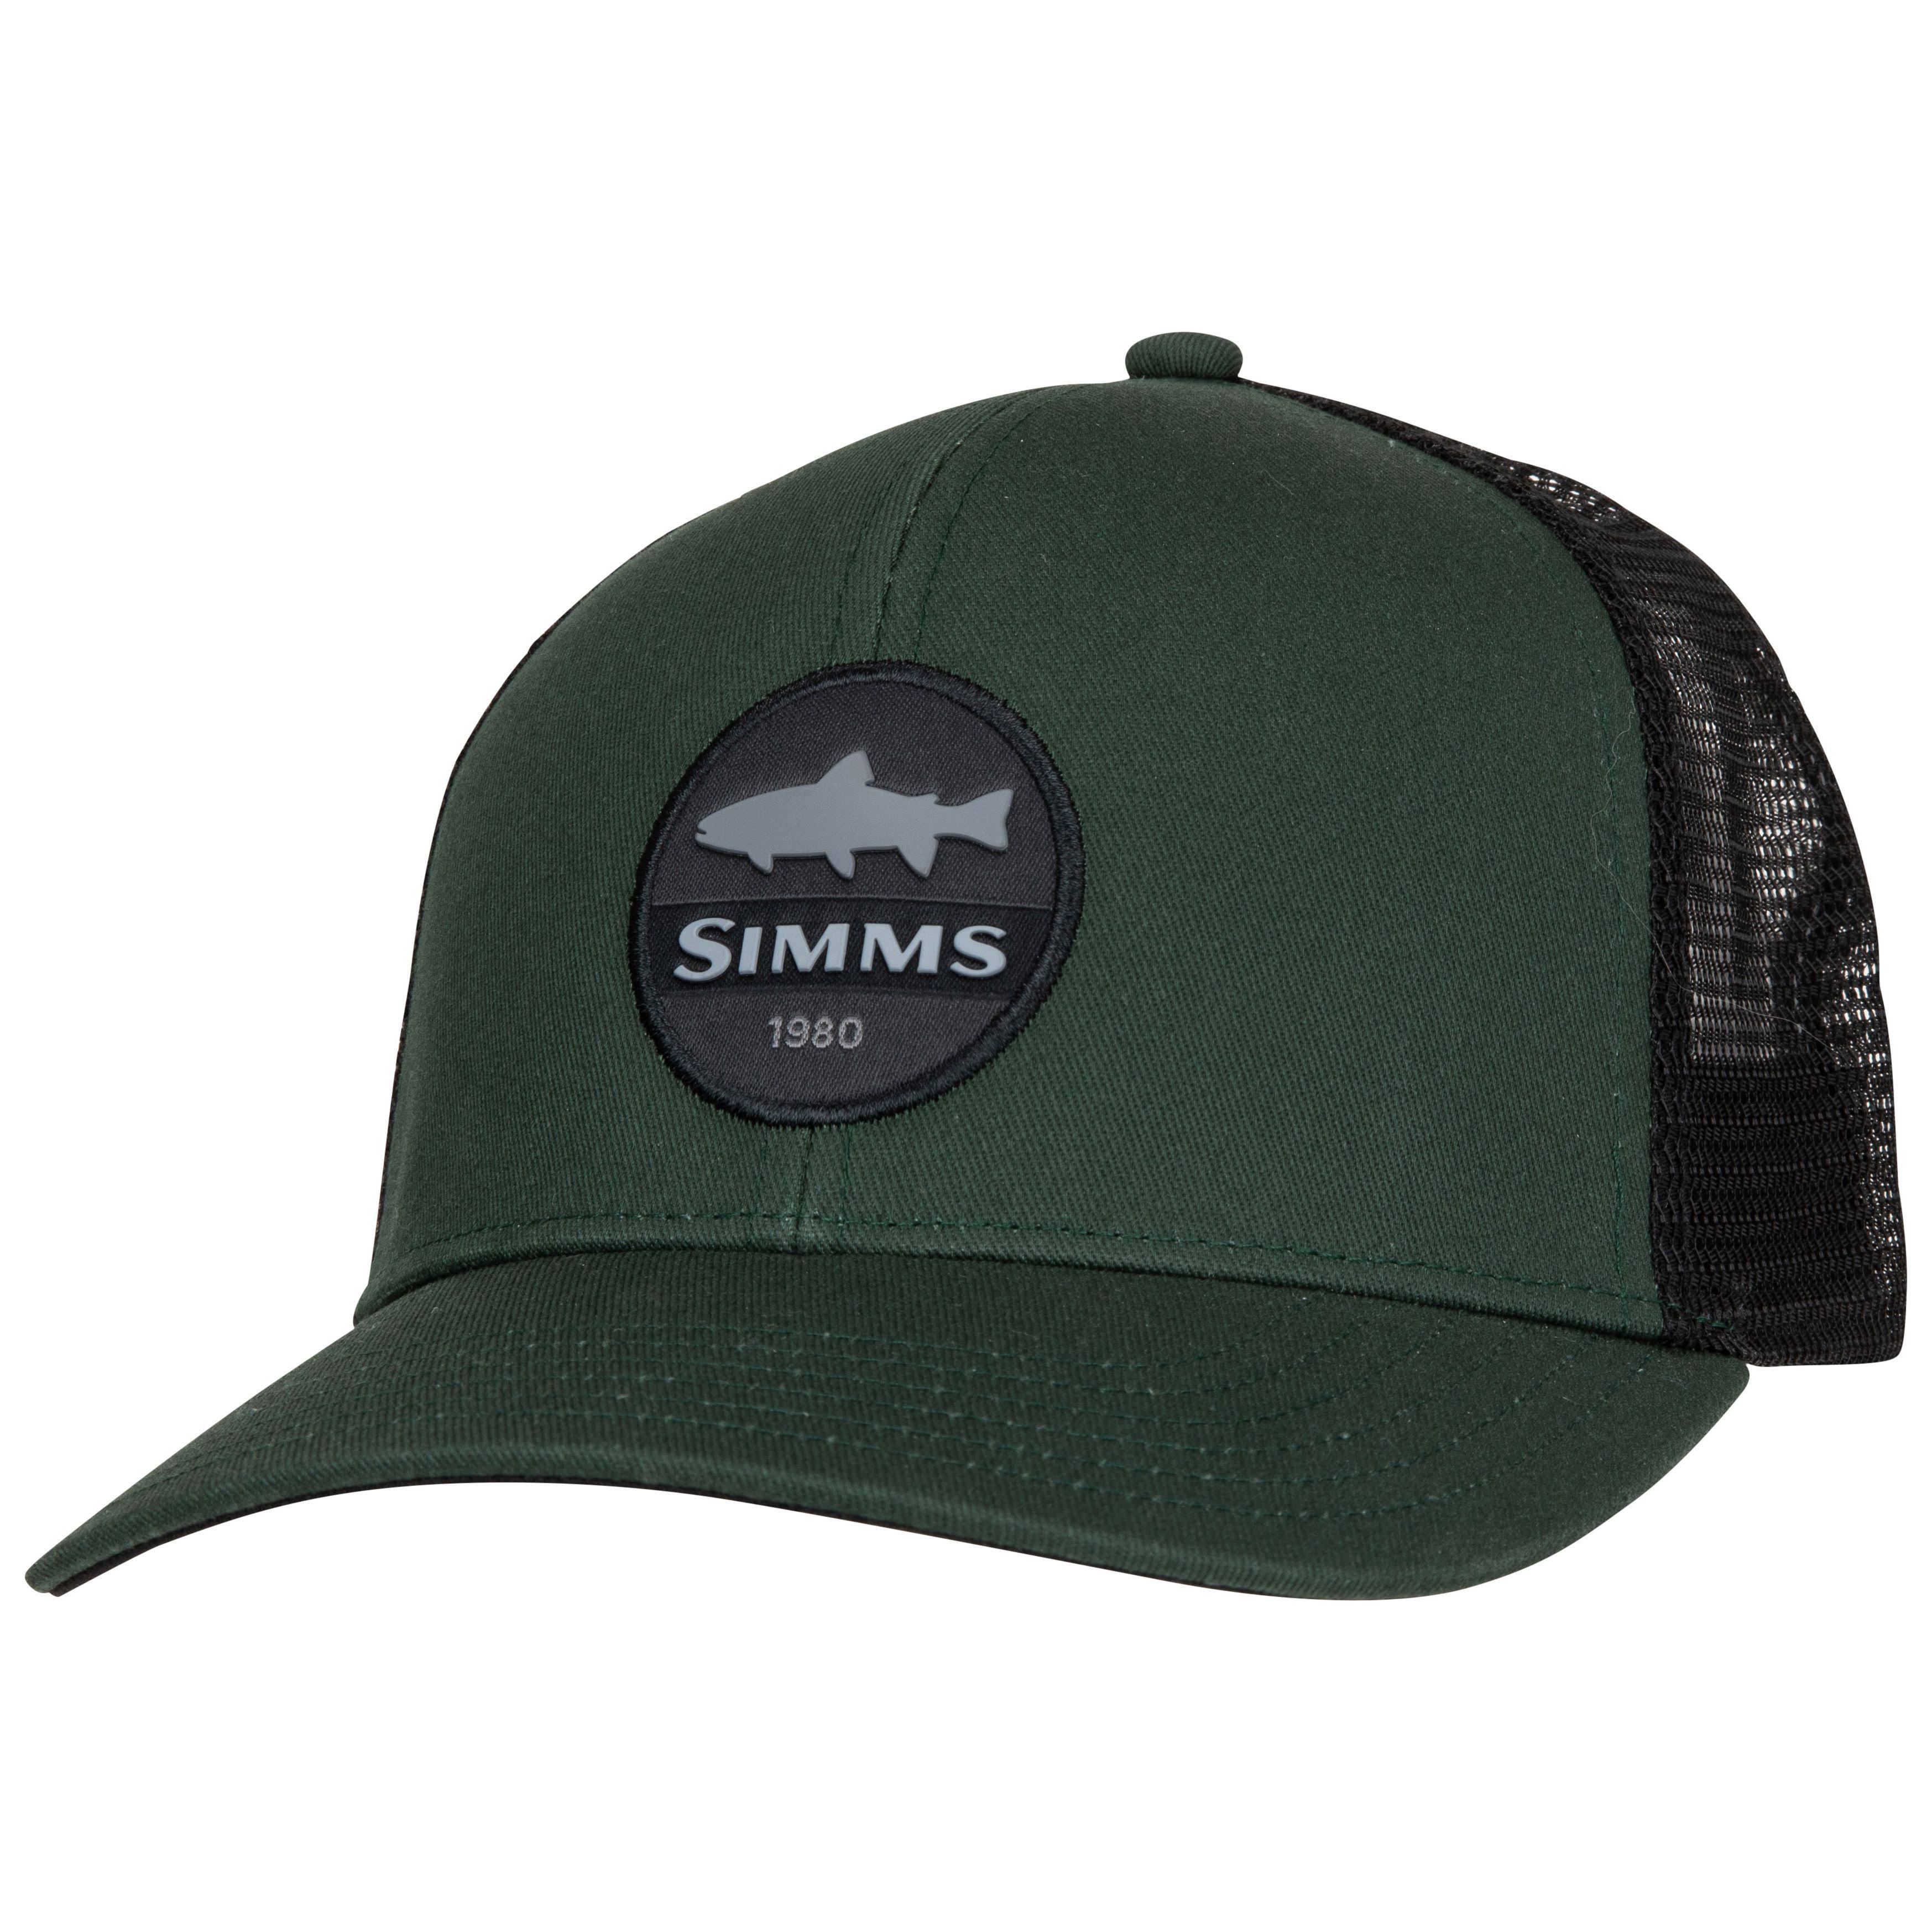 Simms Trout Patch Trucker - Foliage